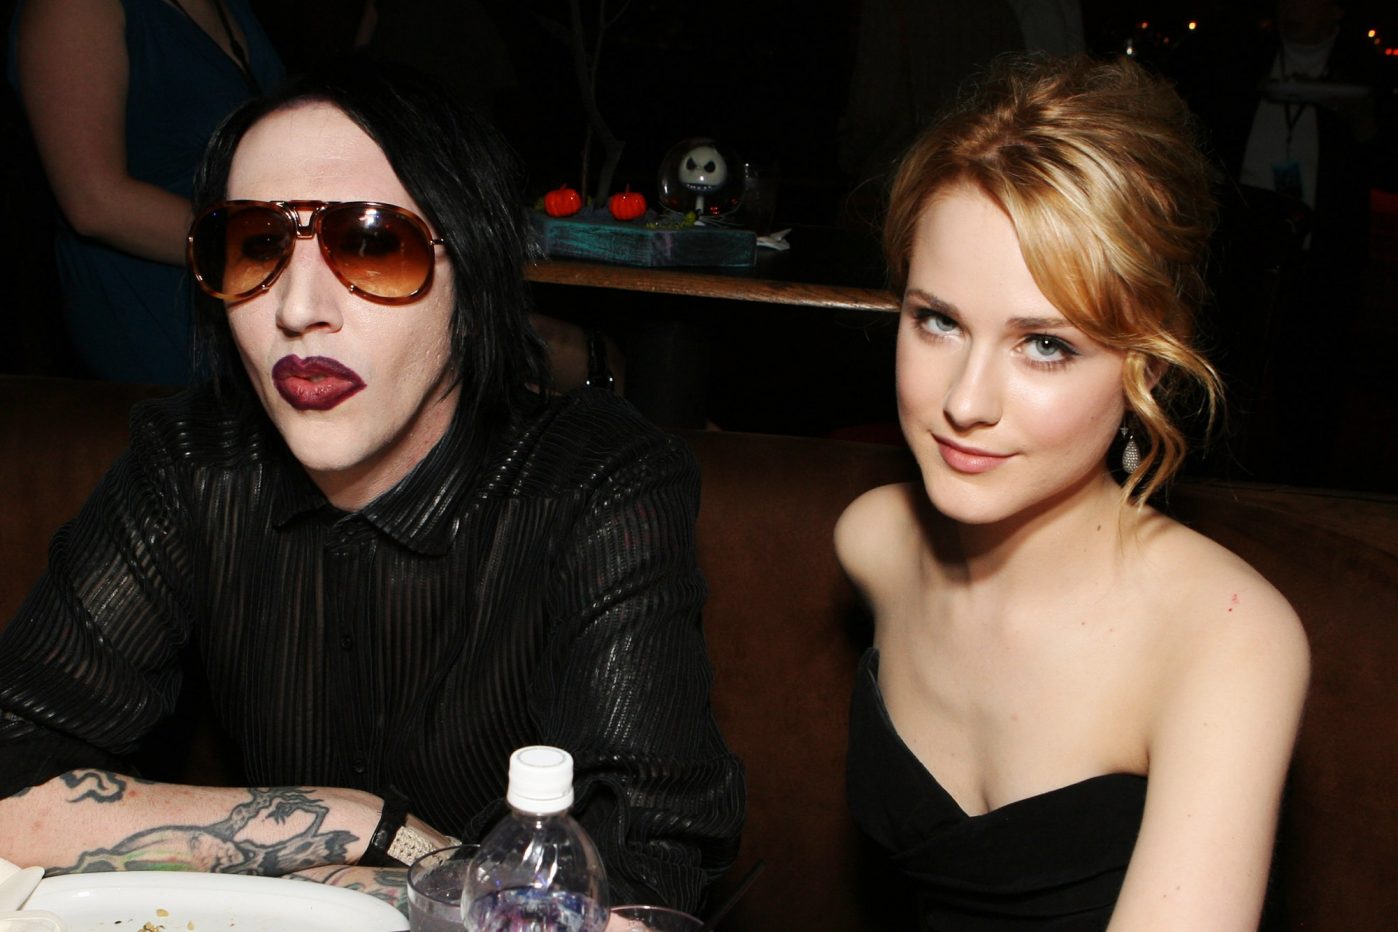 Evan Rachel Wood Accuses Ex-Fiancee Marilyn Manson Of Grooming & Abuse - 4 Other Women Come Forward